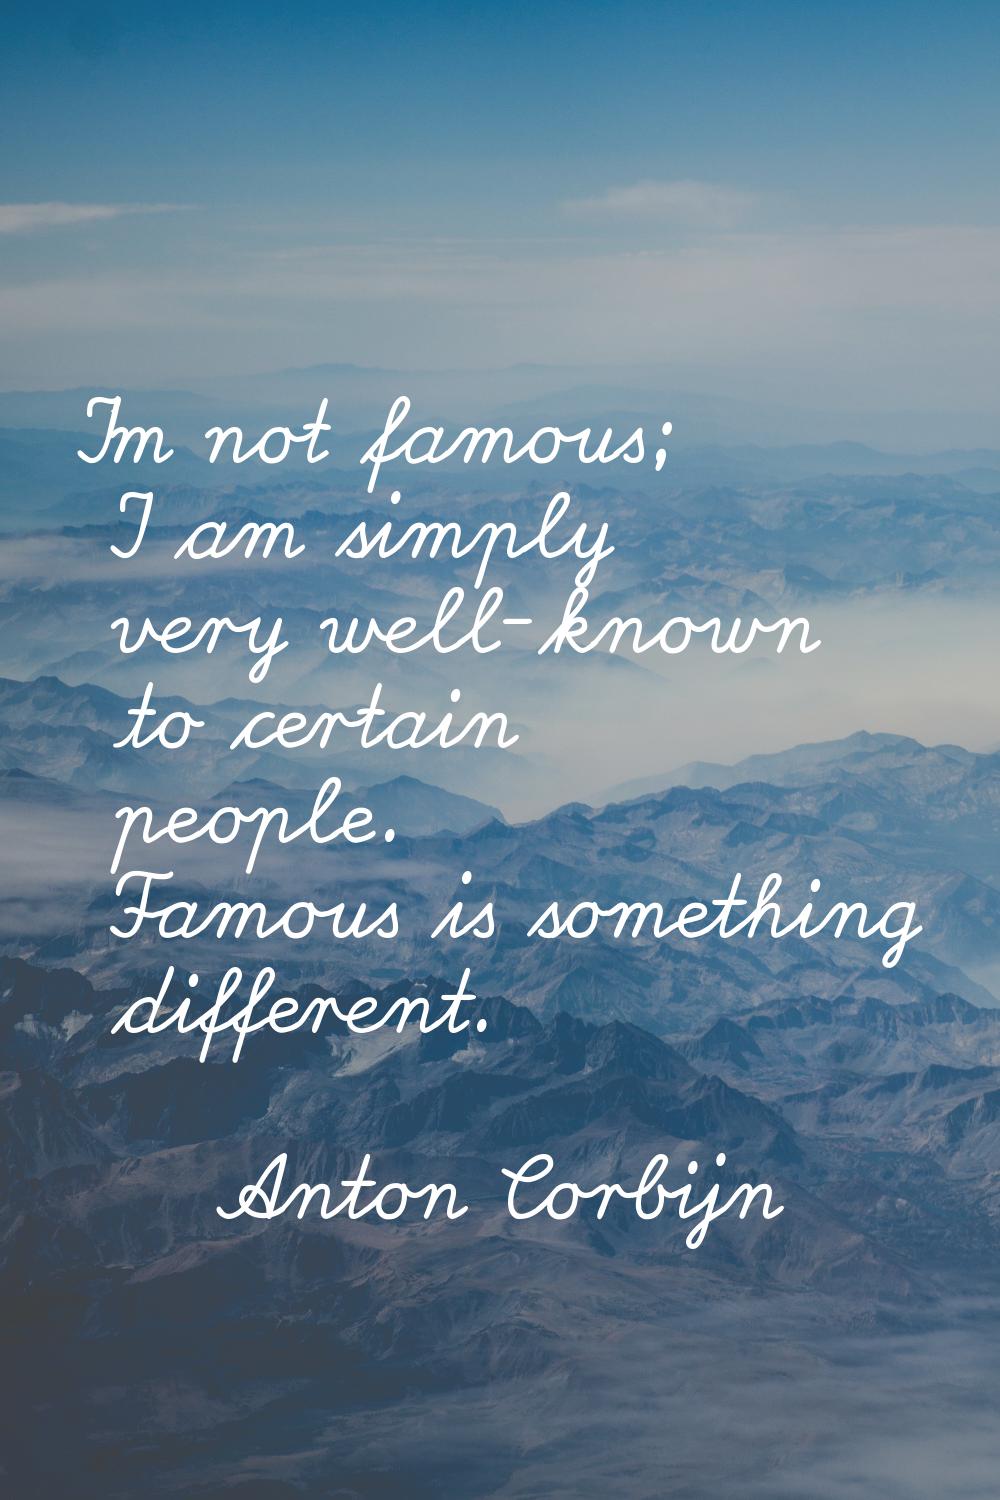 I'm not famous; I am simply very well-known to certain people. Famous is something different.